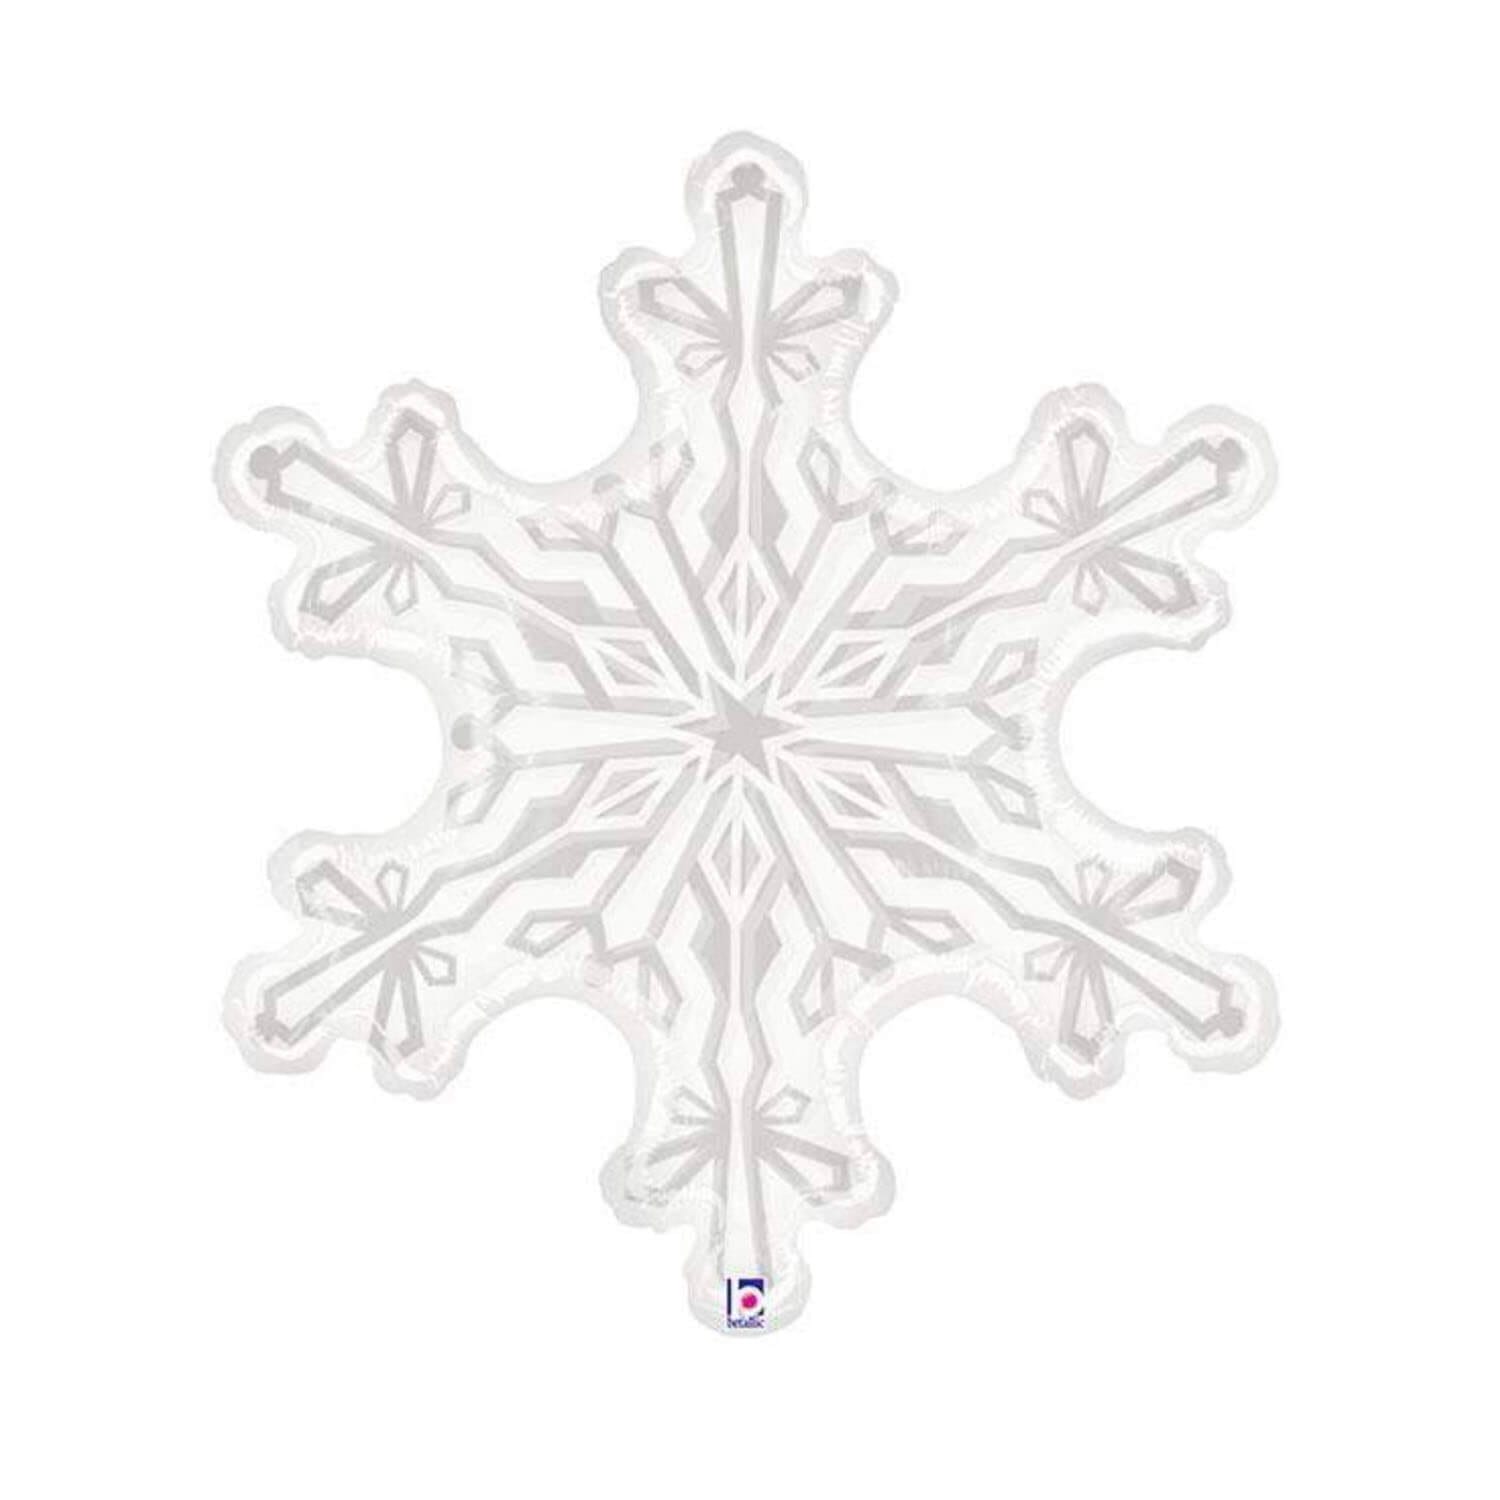 Giant silver snowflake clear helium balloon available for Christmas from Just Peachy in Little Rock, Arkansas.